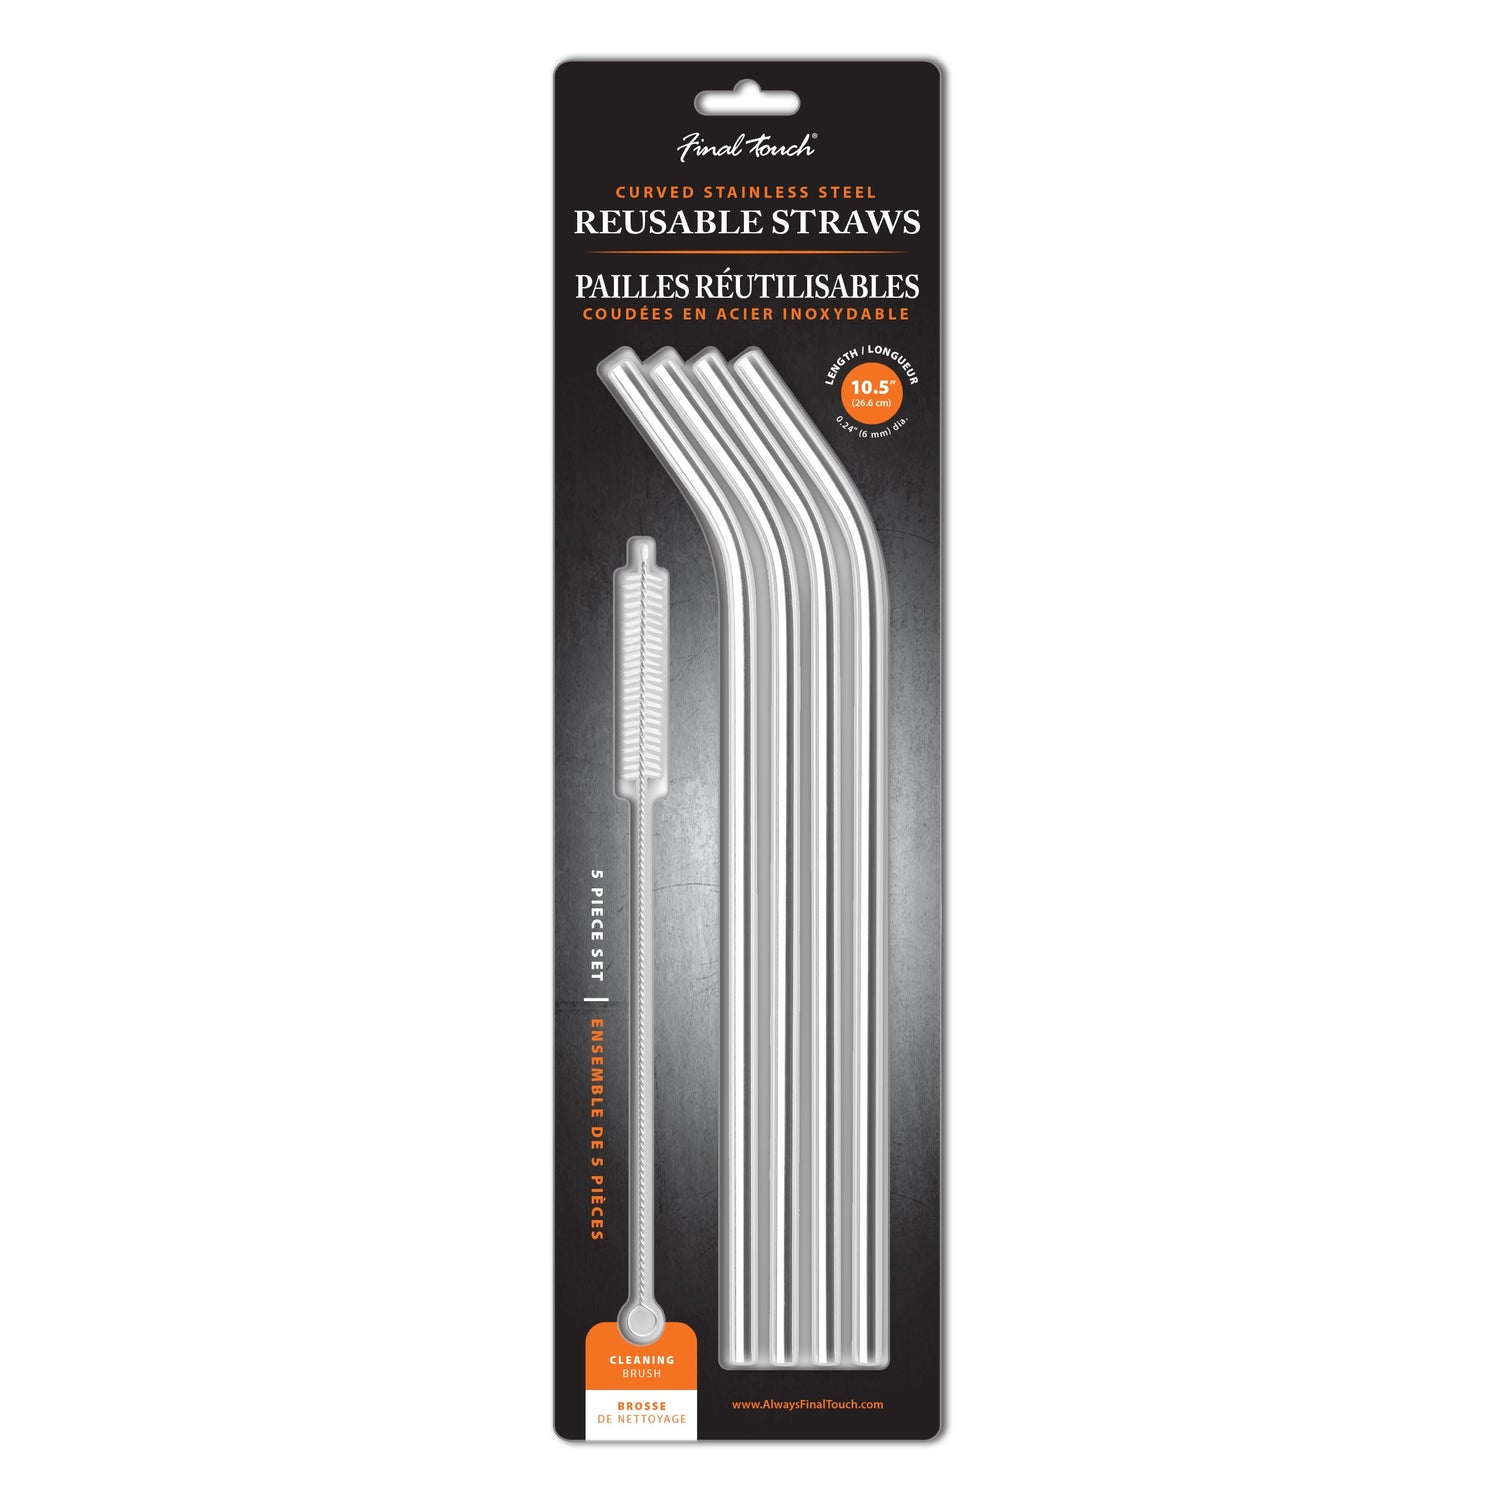 Curved Stainless Steel Straws - Set of 4